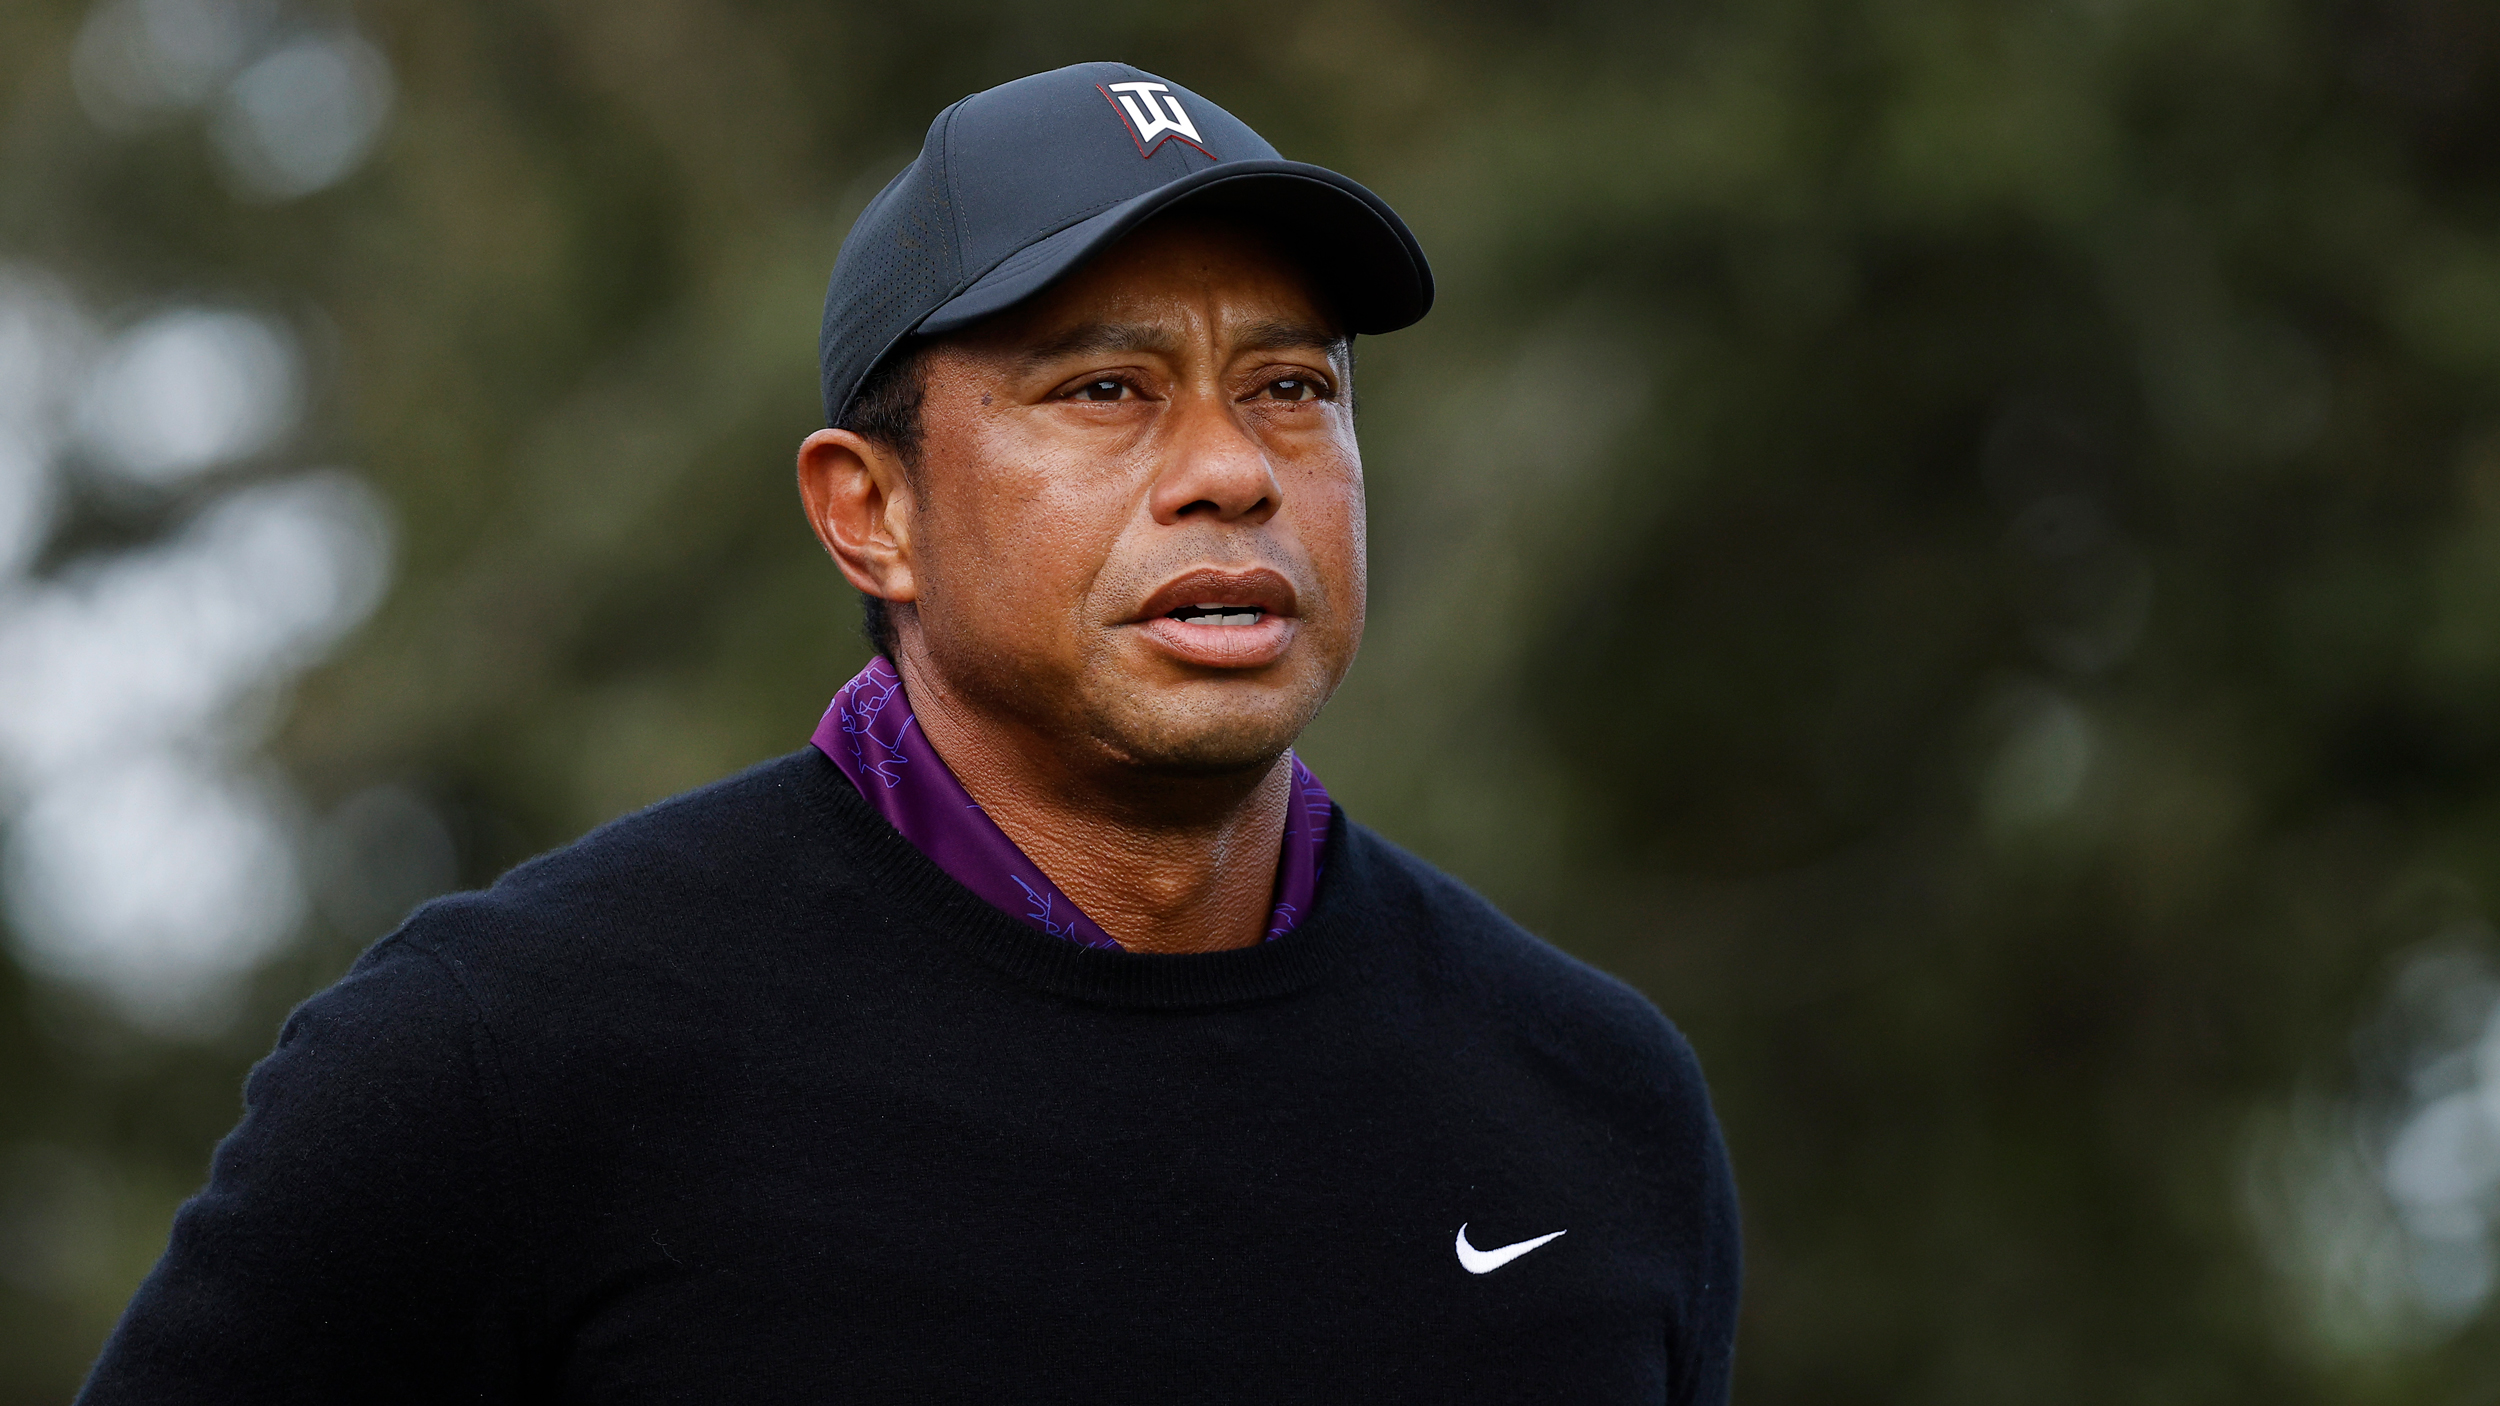 Tiger Woods and Nike Rumored To Be Parting Ways